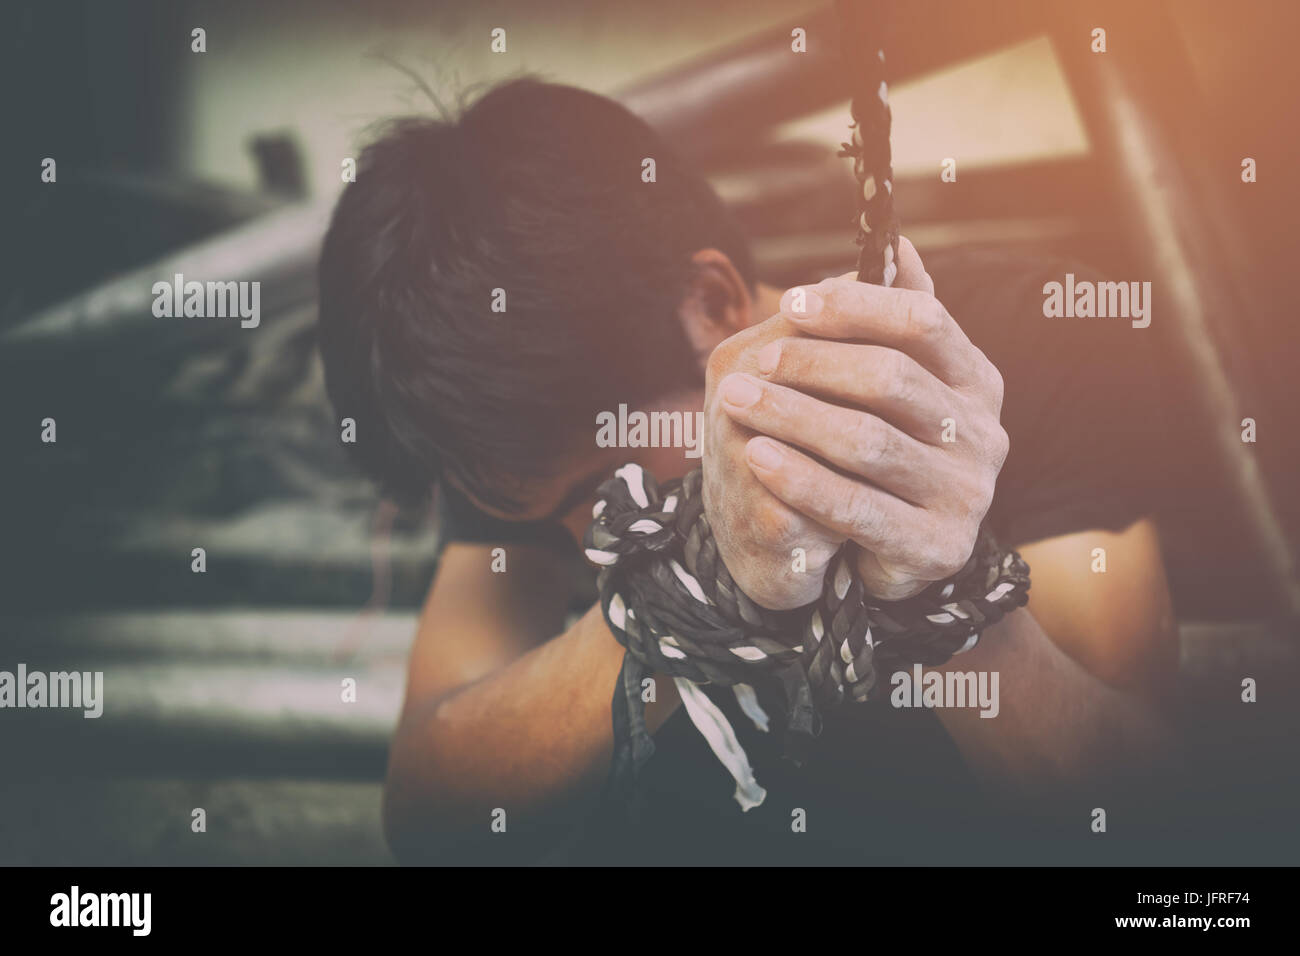 human trafficking, hands tied together with rope Stock Photo